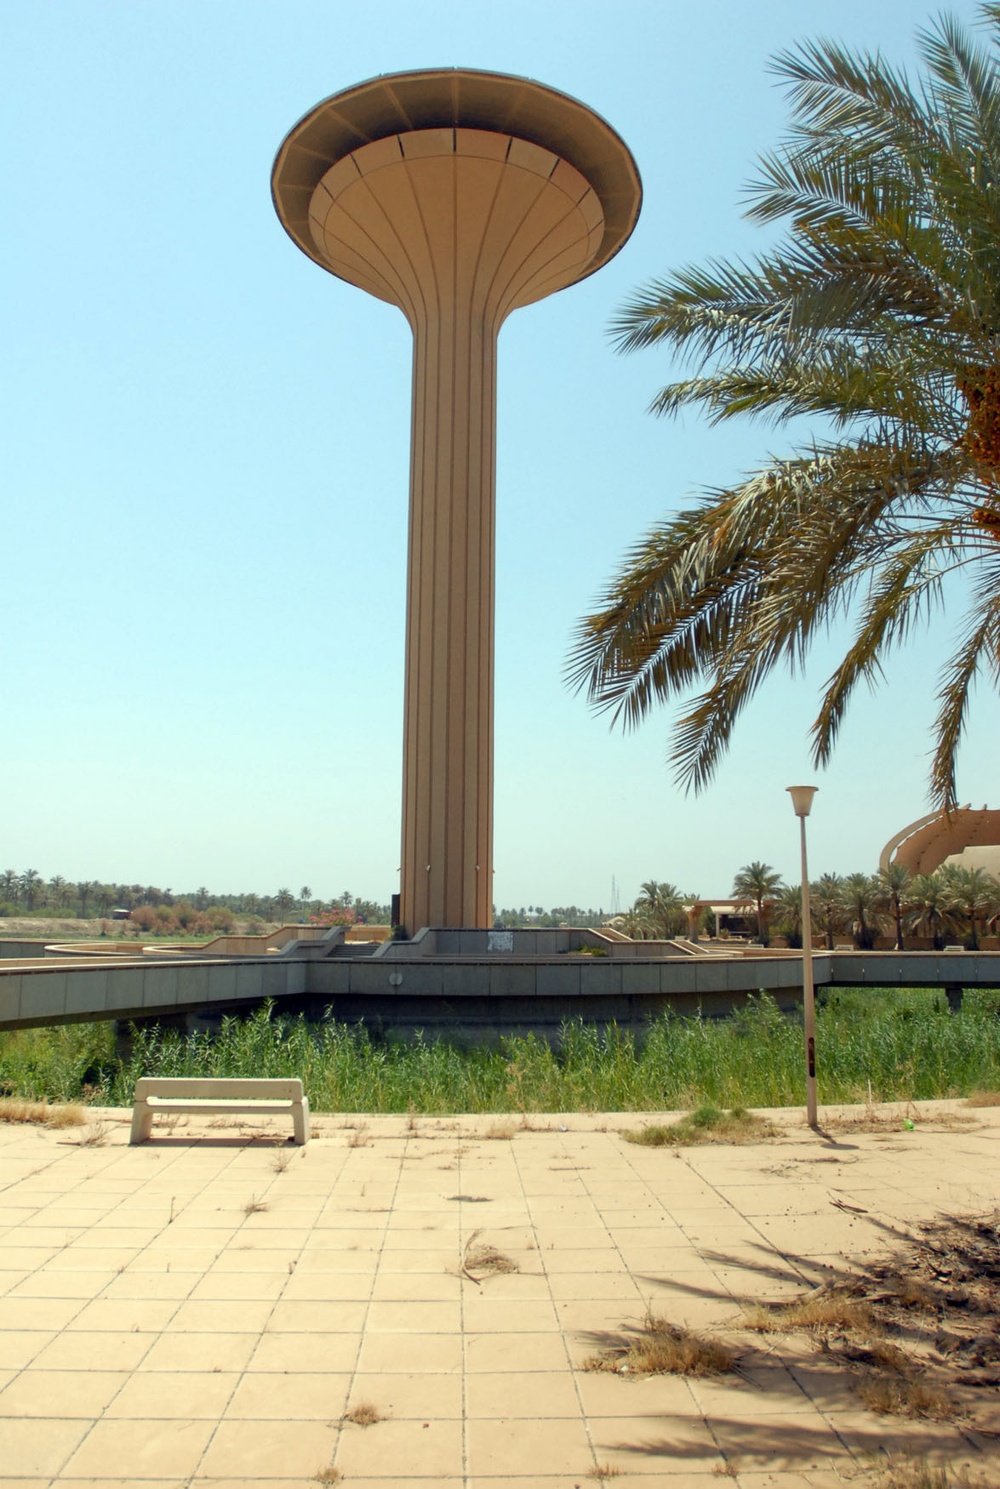 Baghdad Island resort key focus to revitalization efforts in Adhamiyah: Important recreation area targeted by Government of Iraq